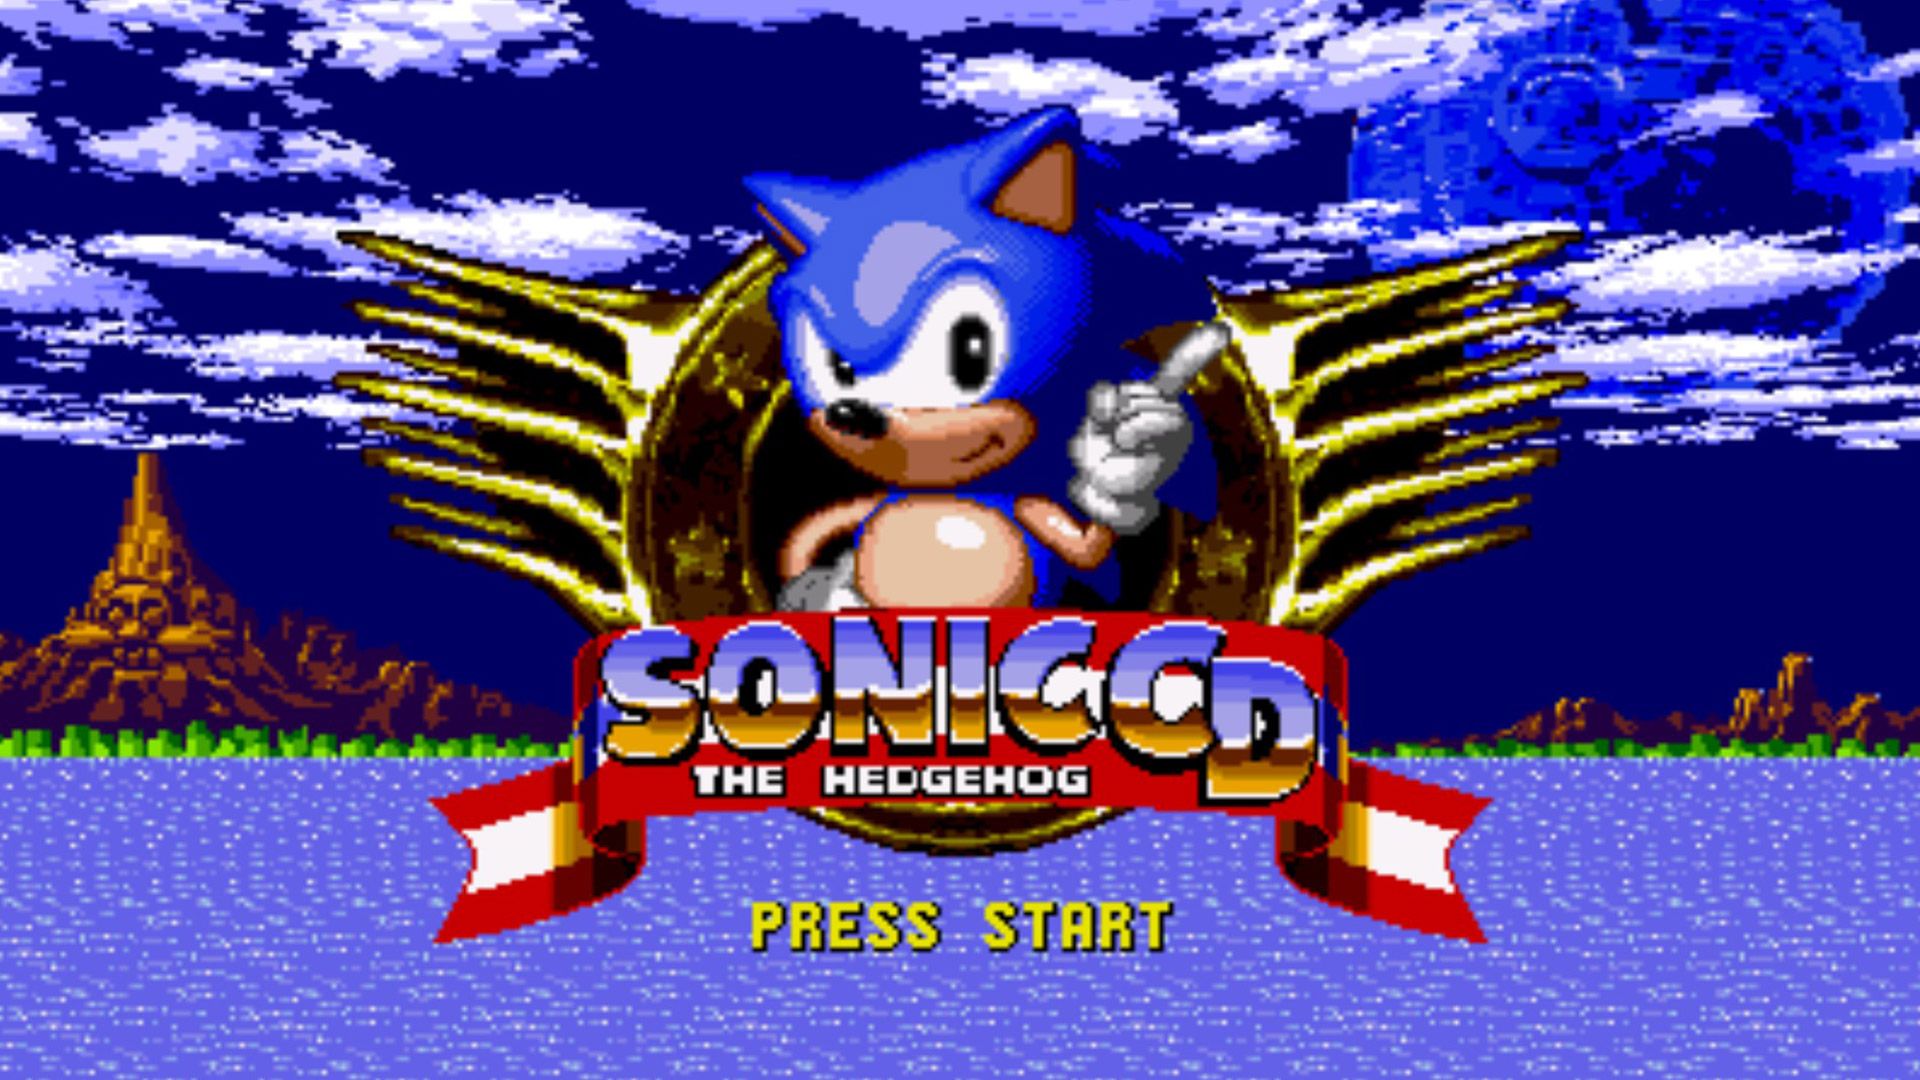 Download Sonic CD 1000 XAP File for Windows Phone  Appx4Fun